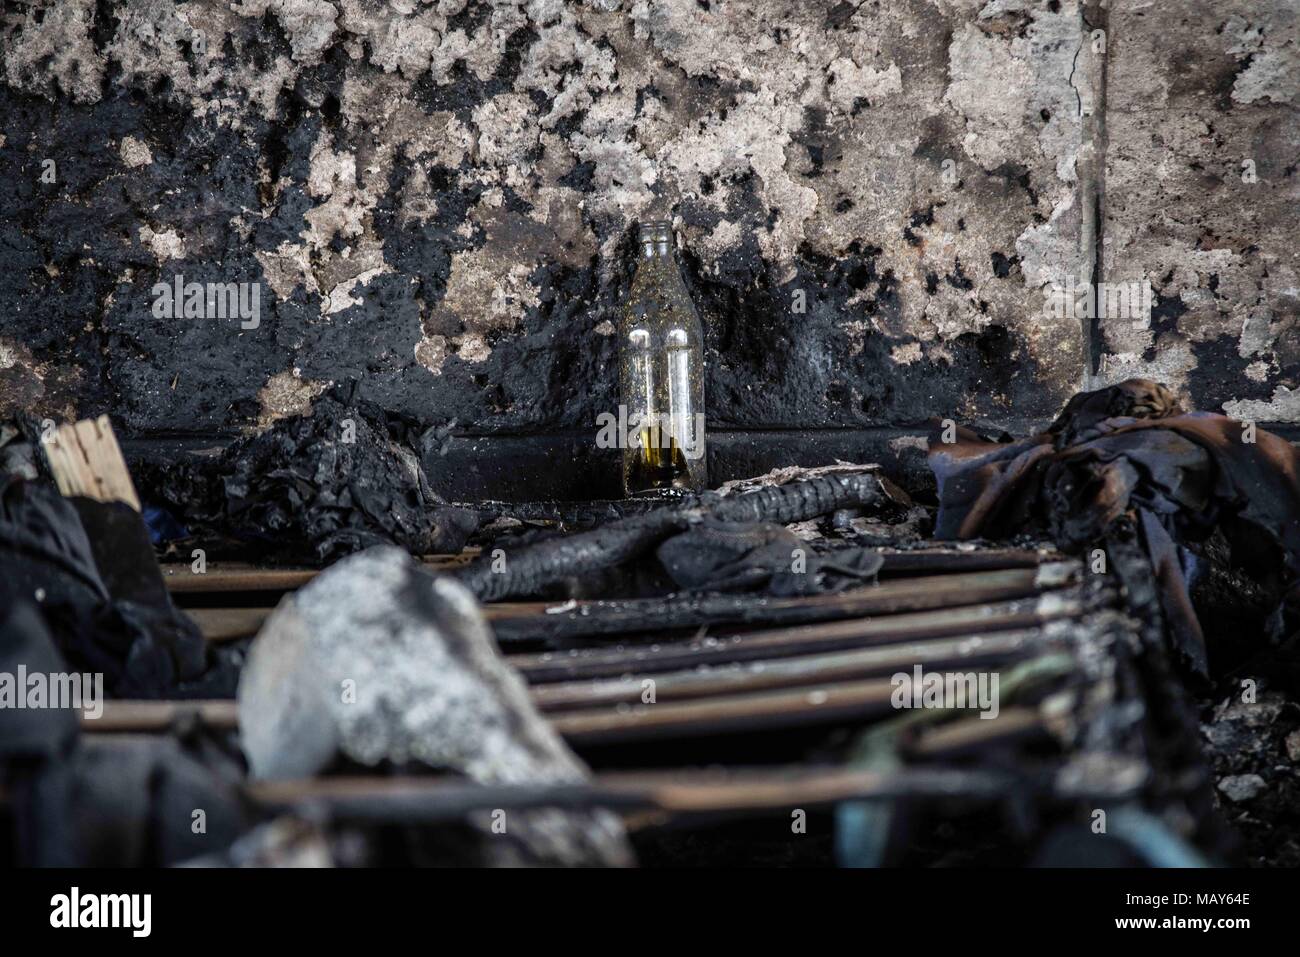 April 5, 2018 - MÃ¼Nchen, Bayern, Germany - A glass bottle stands against the backdrop of the charred wall of a bridge that housed a homeless camp in Munich, Germany. A homeless camp under the ReichenbachbrÃ¼cke (Reichenbach Bridge) in Munich was the target of a suspected arson attack. The photos display the aftermath and the blackening of the surfaces of the bridge, as well as intense heat melting mattresses down to their springs. Damage to the bridge is estimated at 25,000 Euros. Four men, ages 24-53 were living there and unharmed. The suspects may have been two men who were standing nea Stock Photo